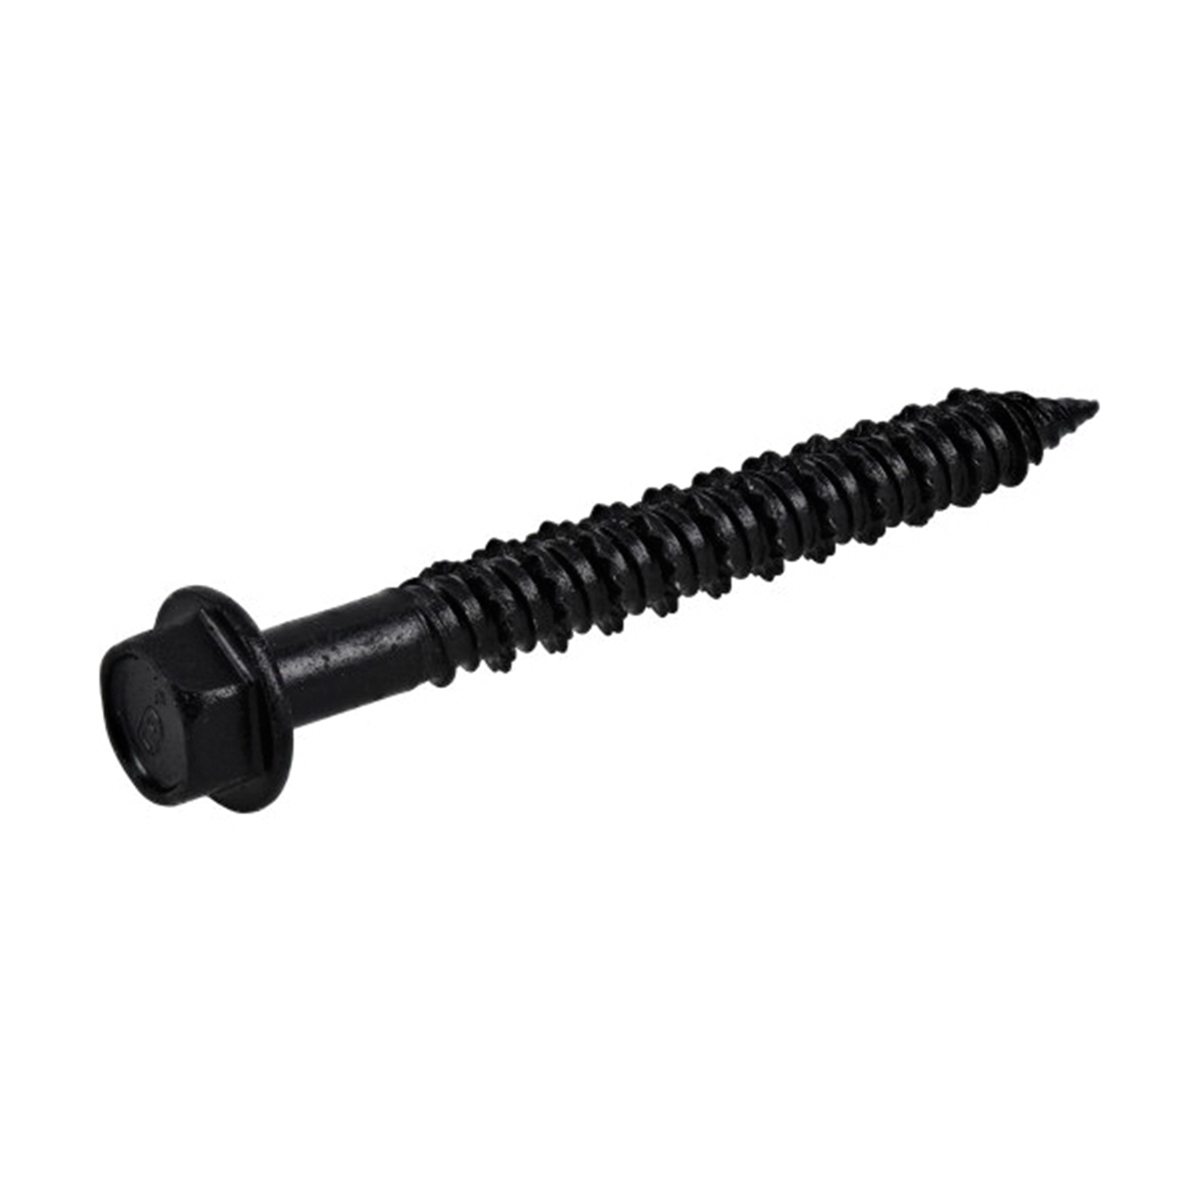 376585 Concrete Screw Anchor, 1/4 in Dia, 2-1/4 in L, Carbon Steel, Epoxy-Coated, 100/PK